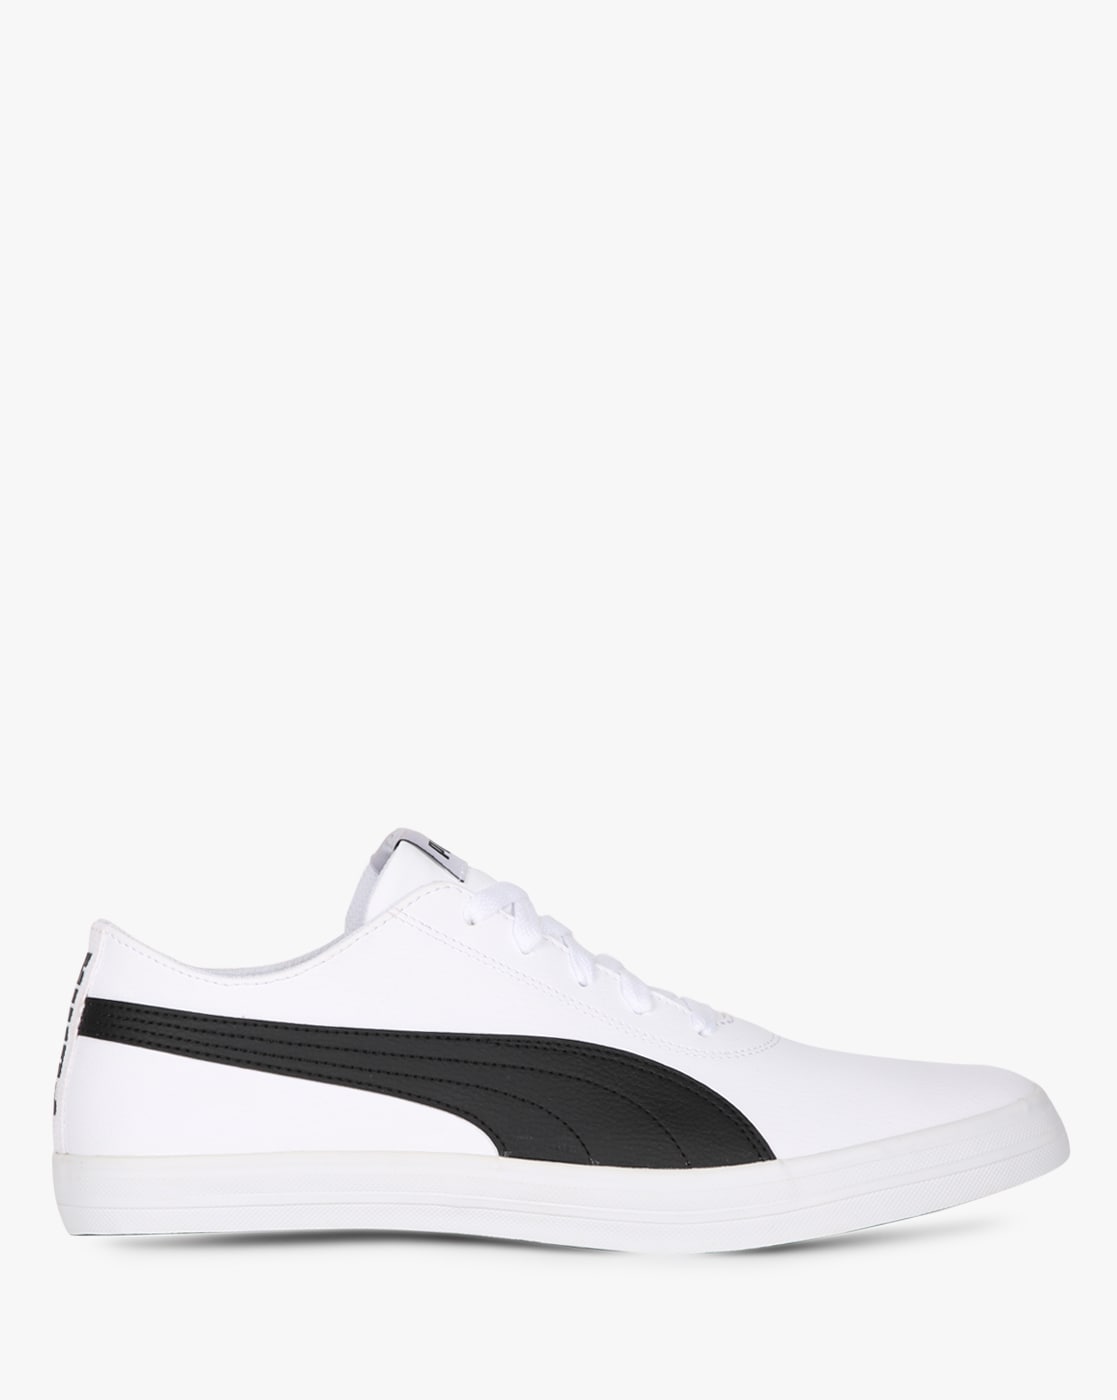 Urban Act Low Top Sneaker In Mesh And Rubberized Fabric for Man in White/  Black | Valentino IL